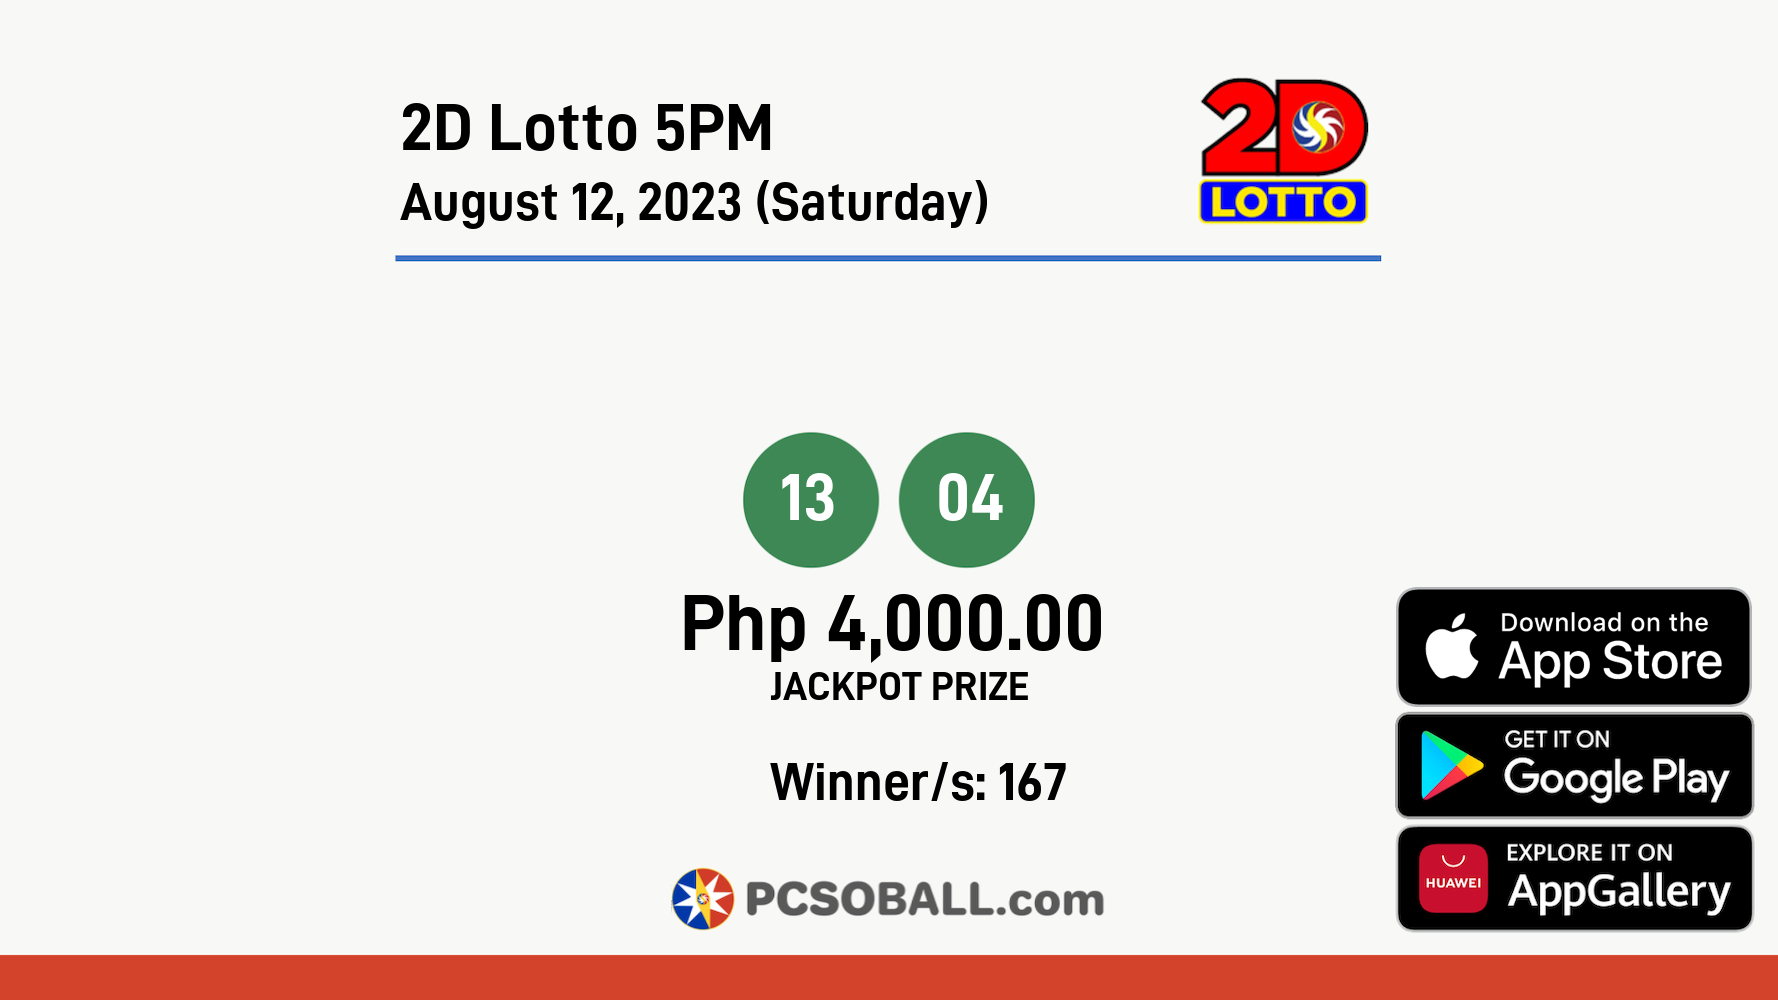 2D Lotto 5PM August 12, 2023 (Saturday) Result